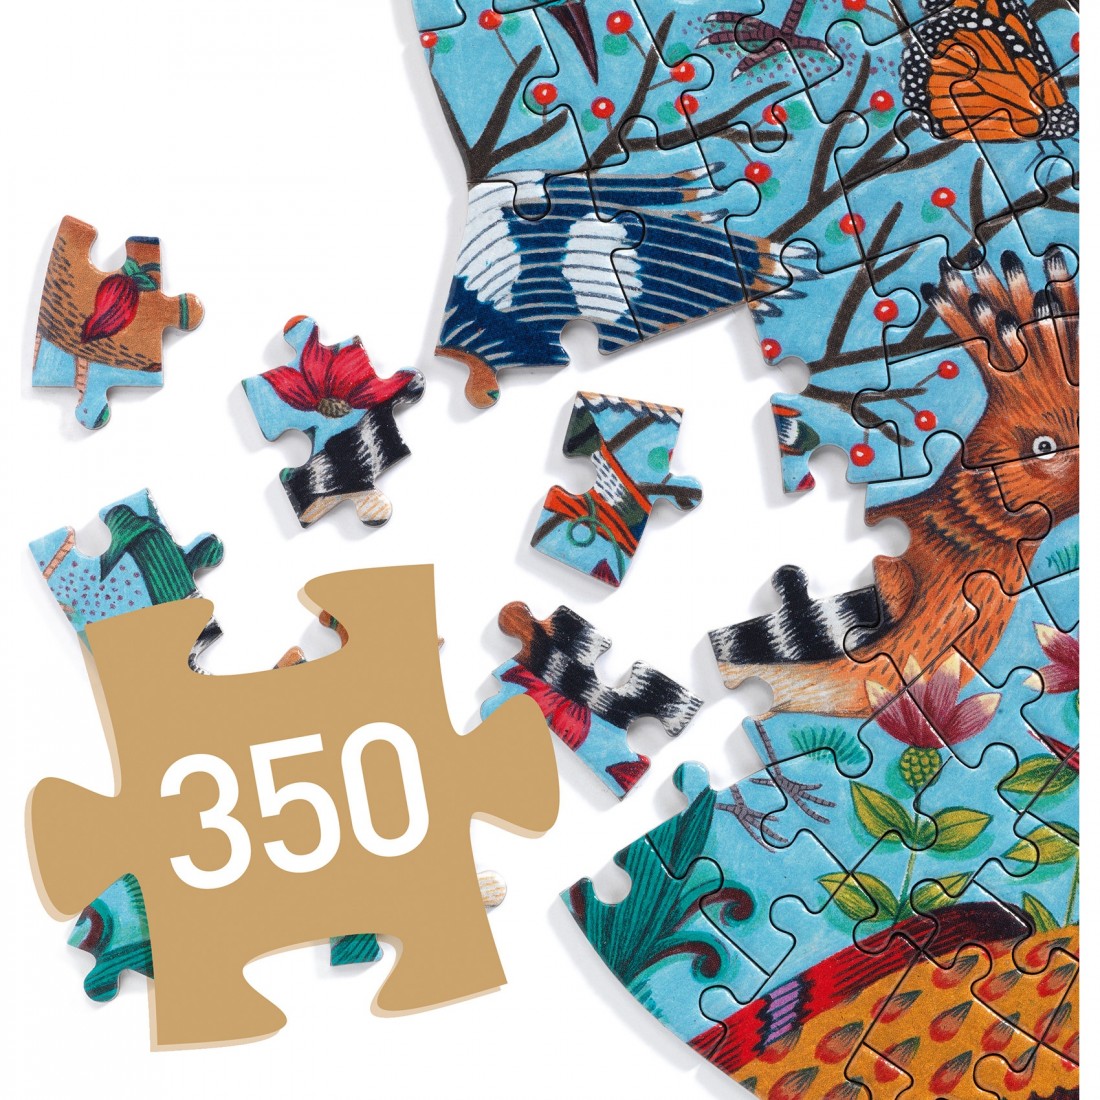 Djeco Puzzle Gallery Miss Birdy 350 piece – Two Kids and A Dog